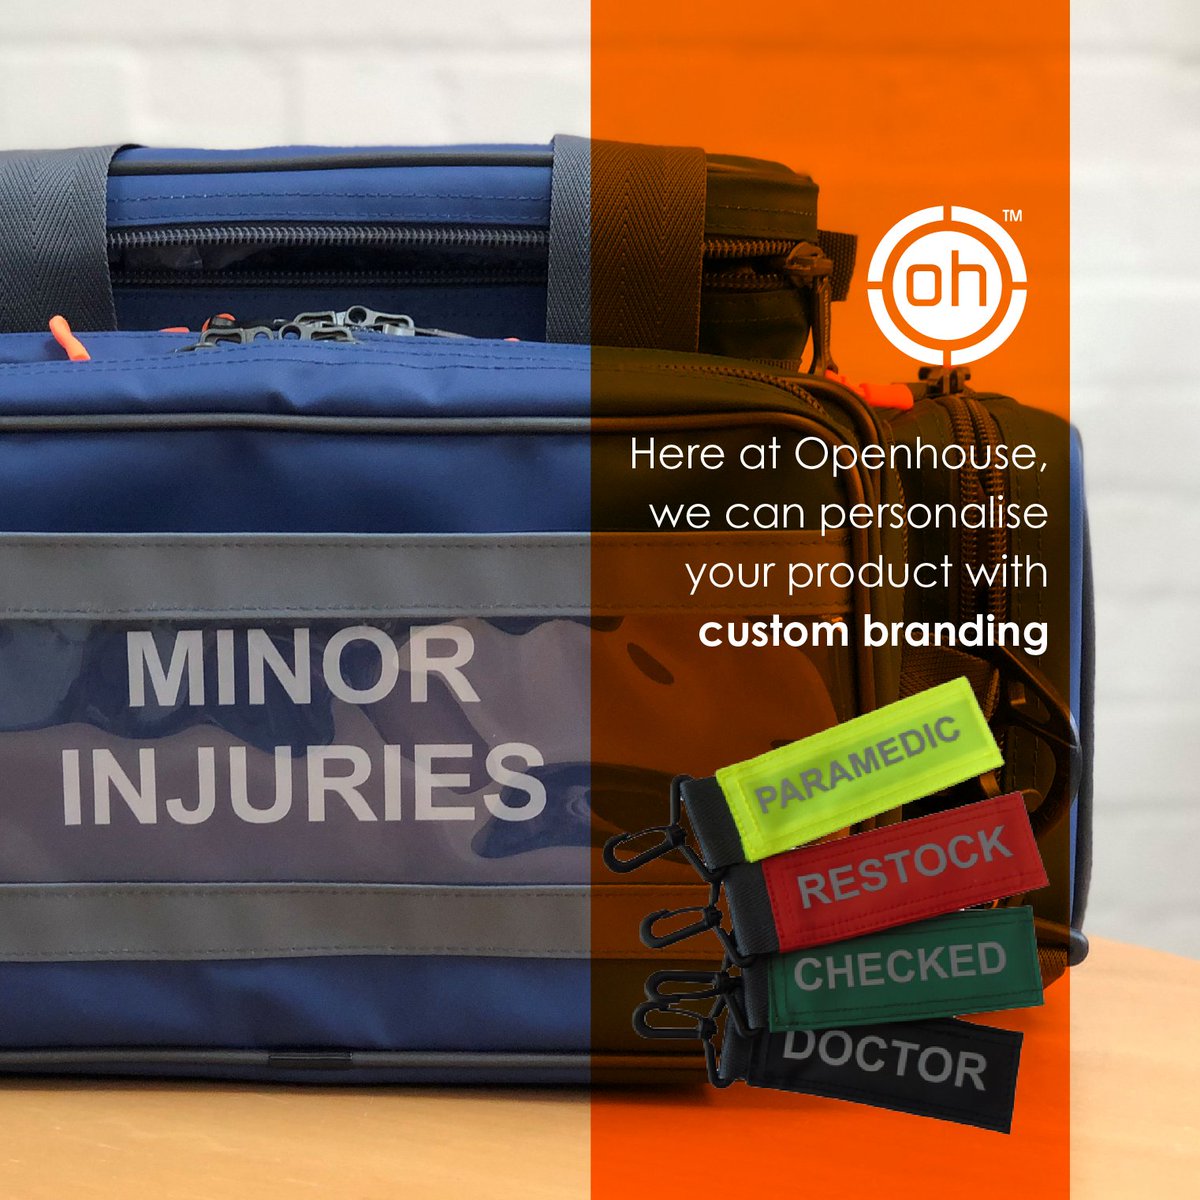 🆔 Our entire bag range can be personalised with either panels or tags to ensure you can identify your kit when it matters.

View the whole range at openhouseproducts.com/product-catego…

#MedicalBags #PhysioKit #Paramedics #EmergencyKit #Openhouse #OHh